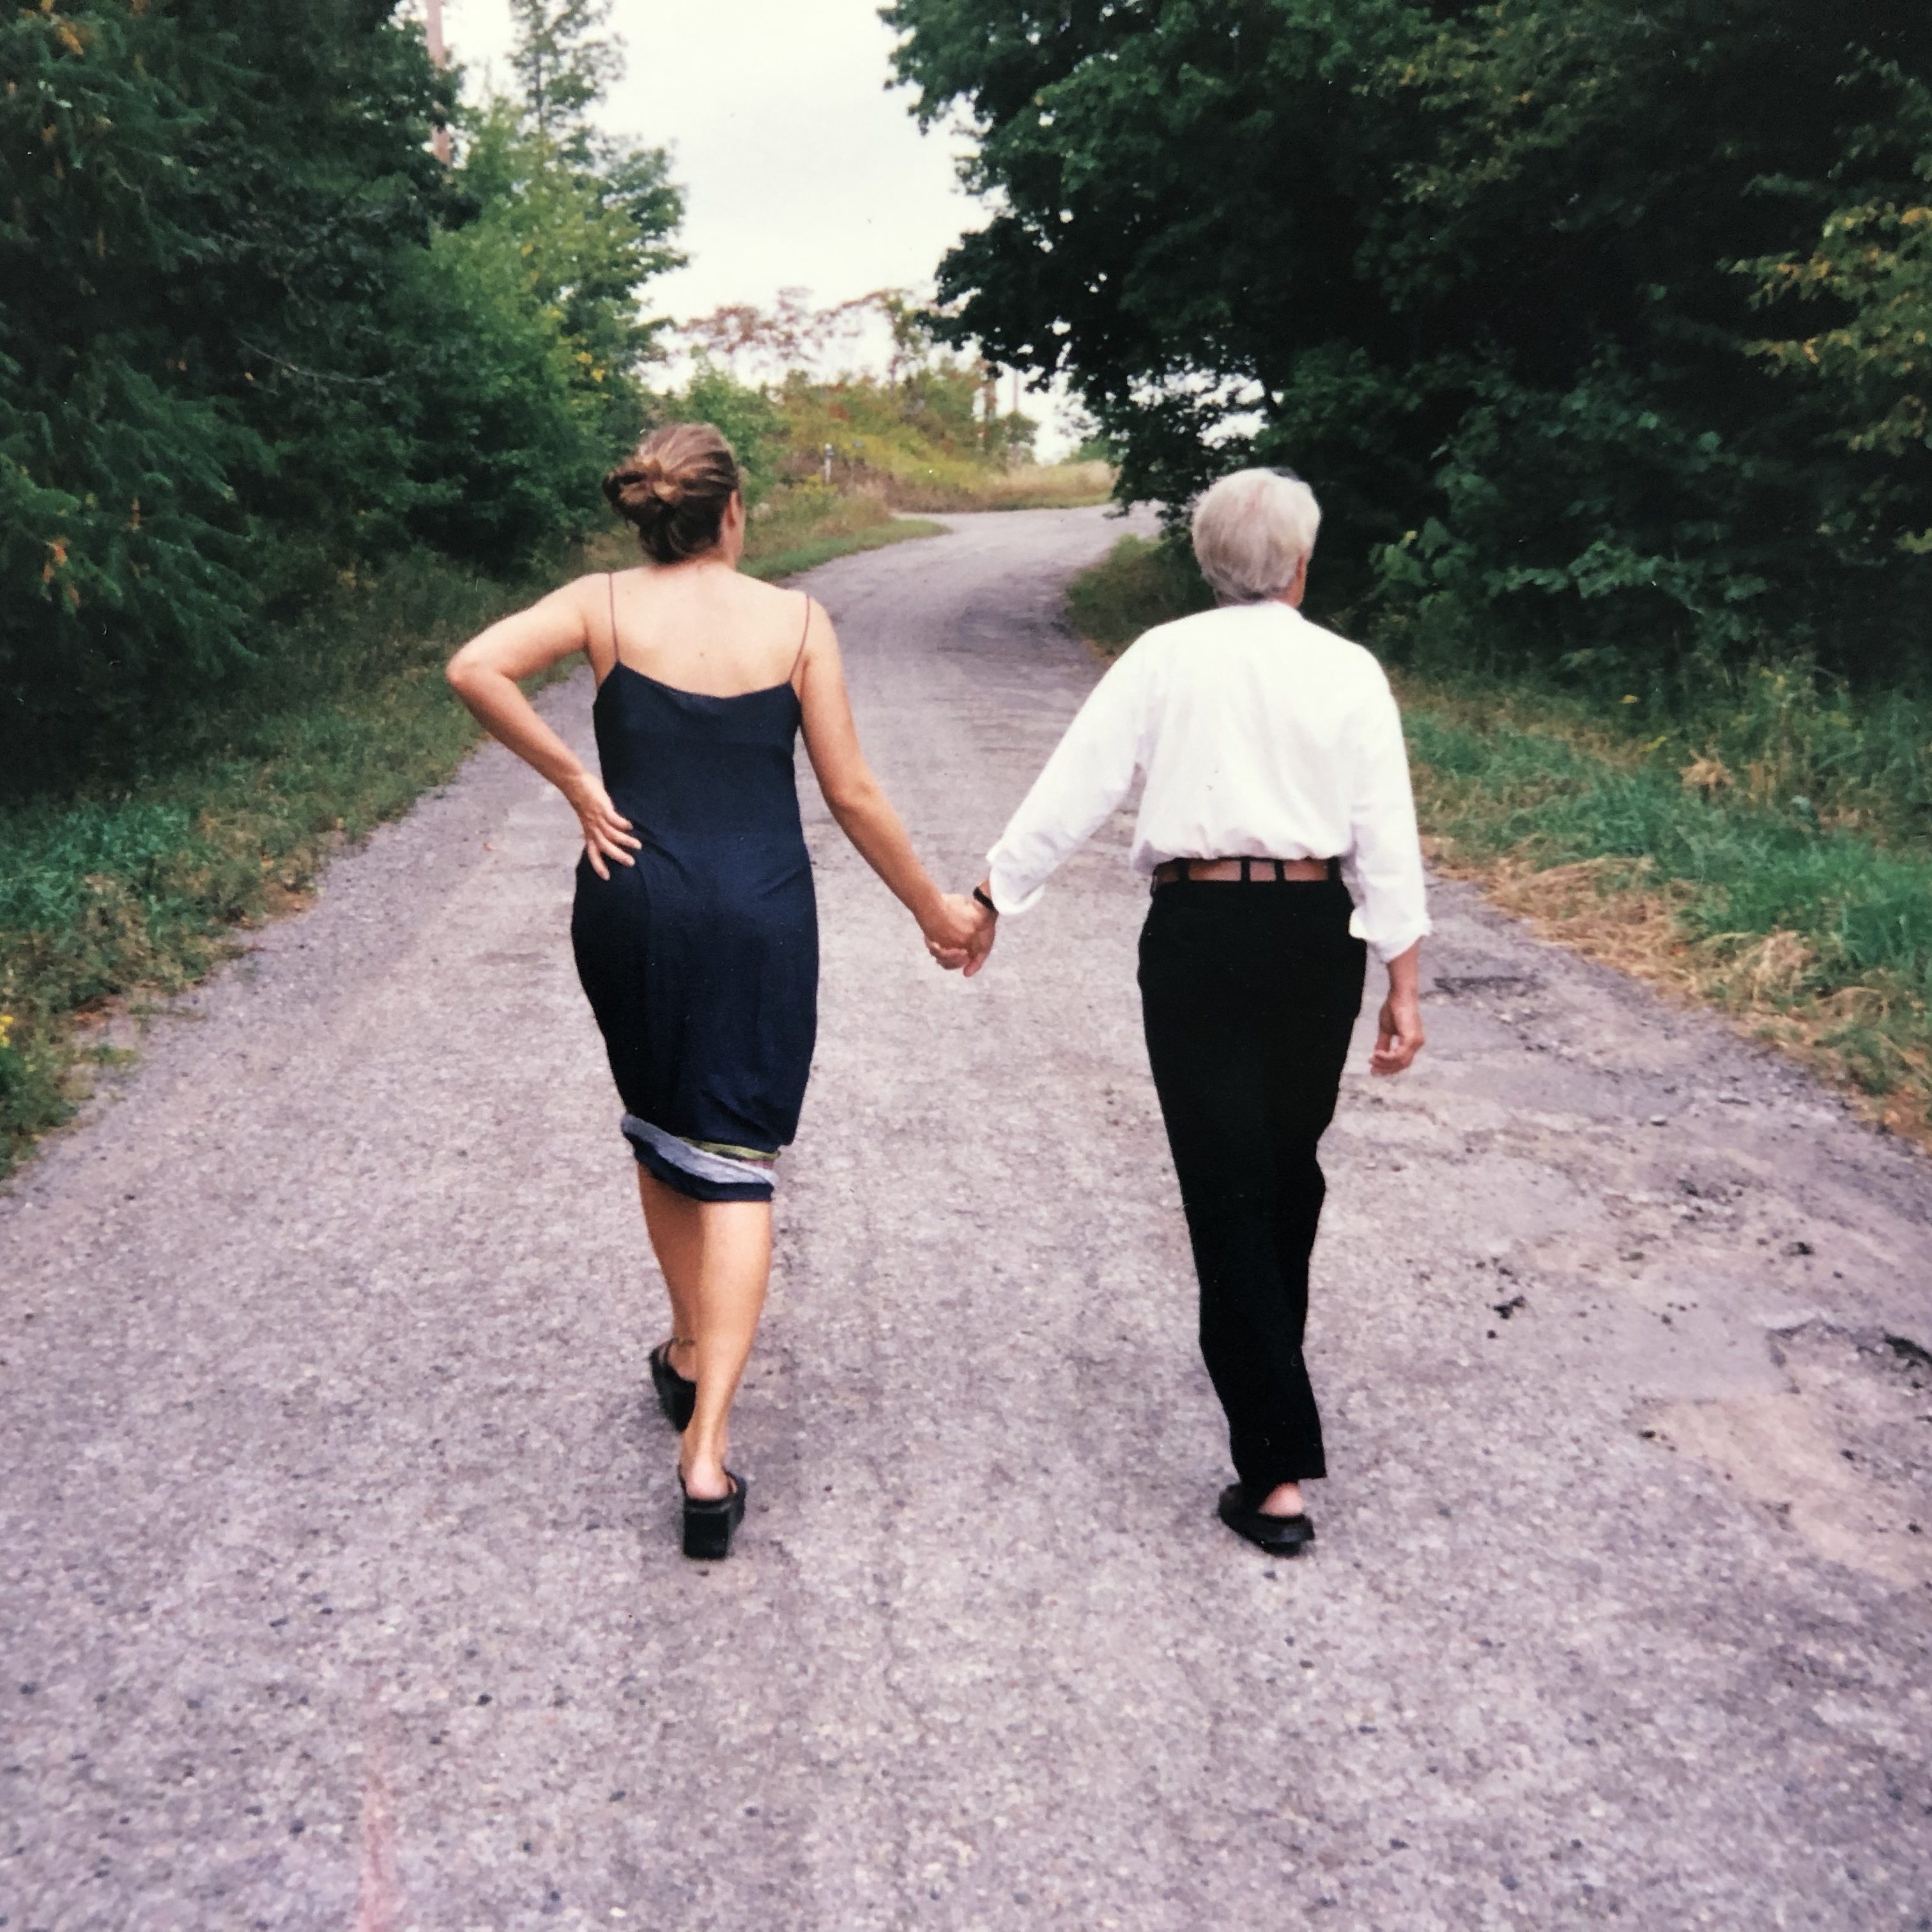 Wittmann and her father walk down a road away from the viewer